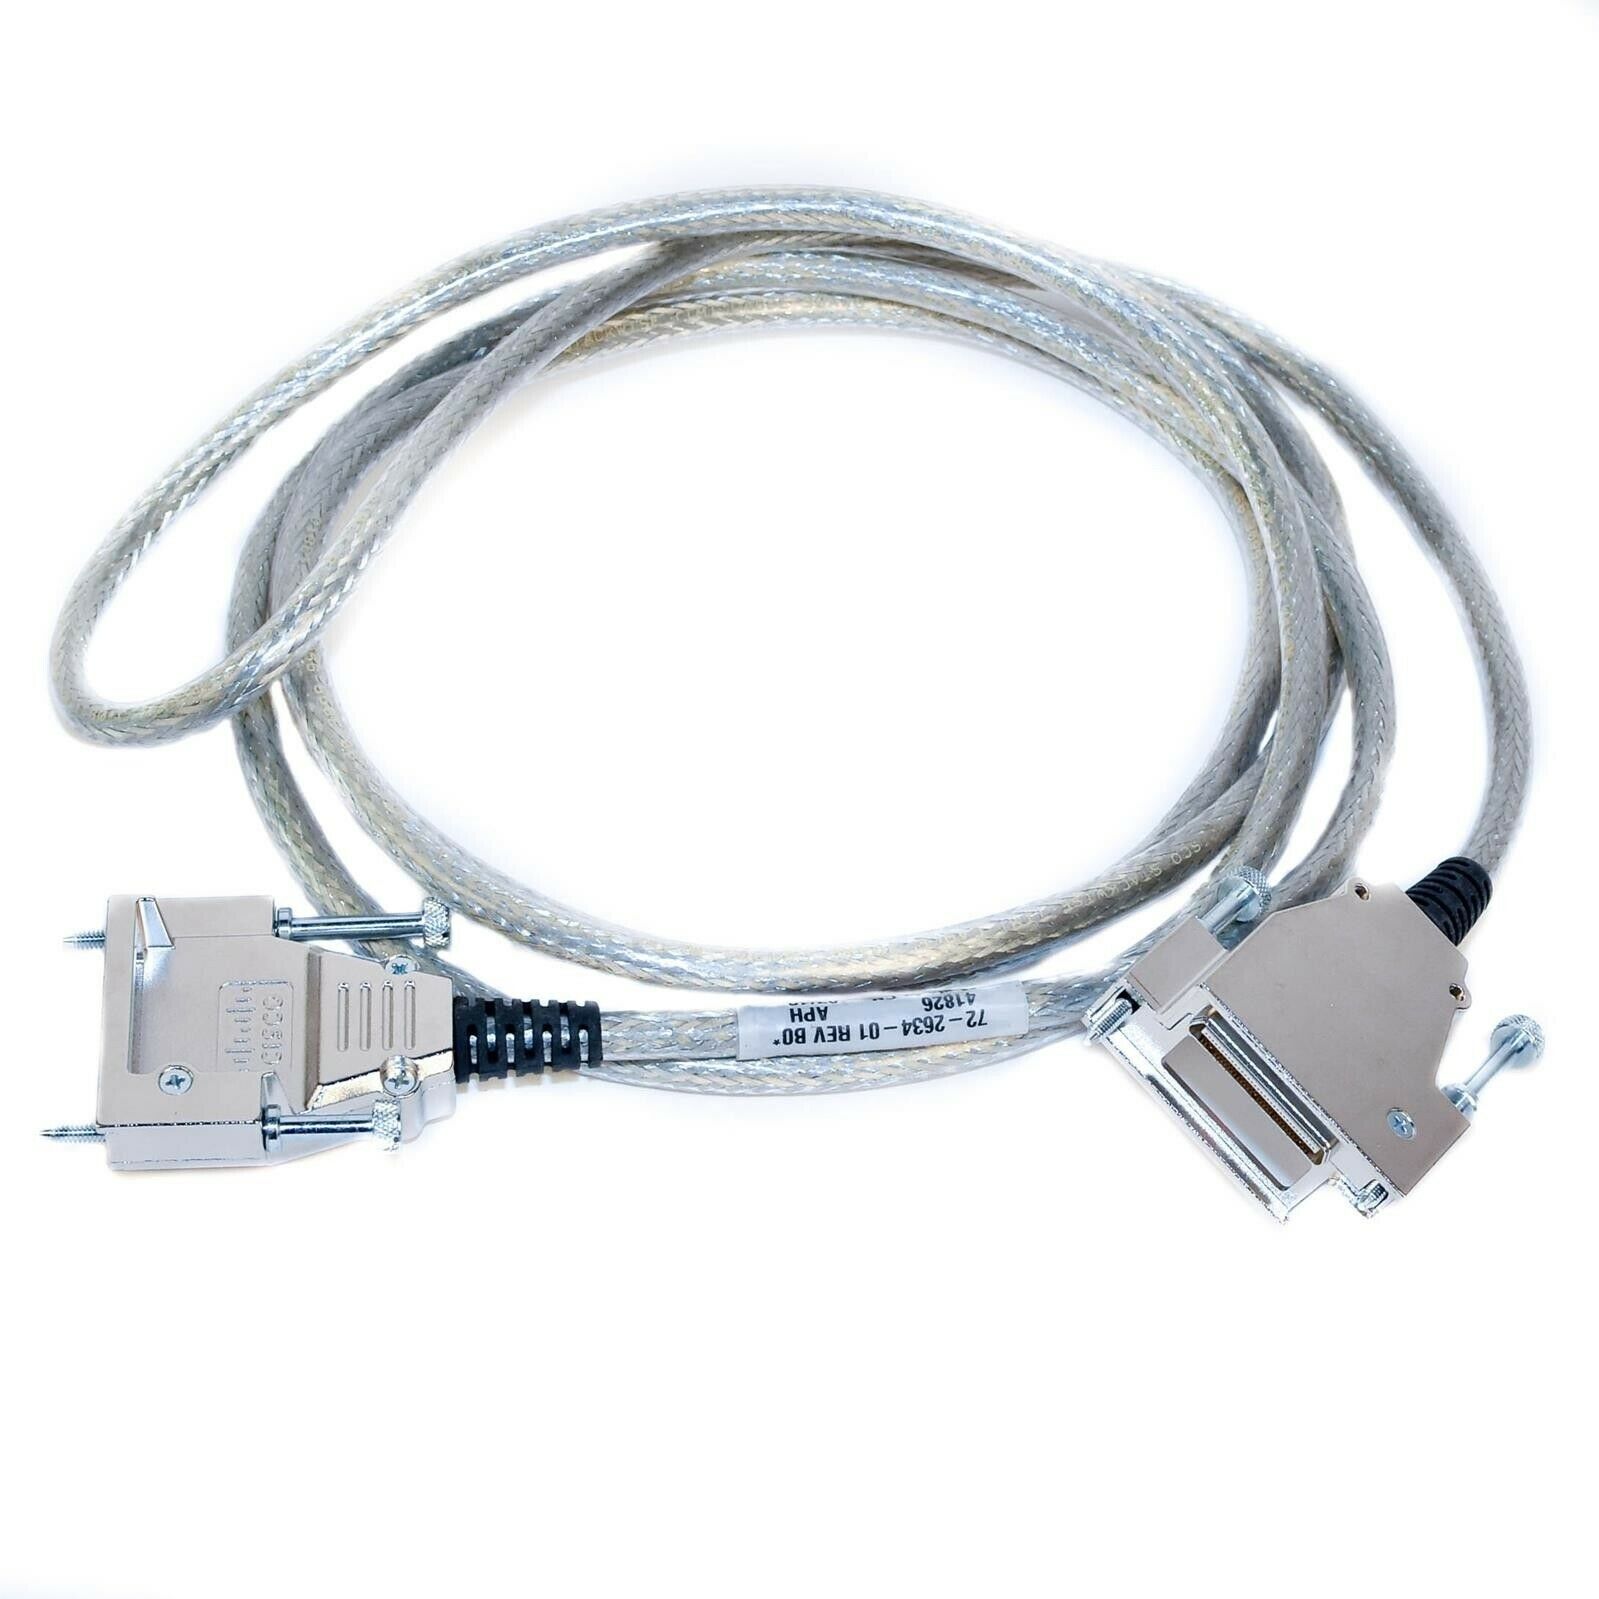 72-2634-01 | Cisco 3M Stackwise 3M Stacking Cable